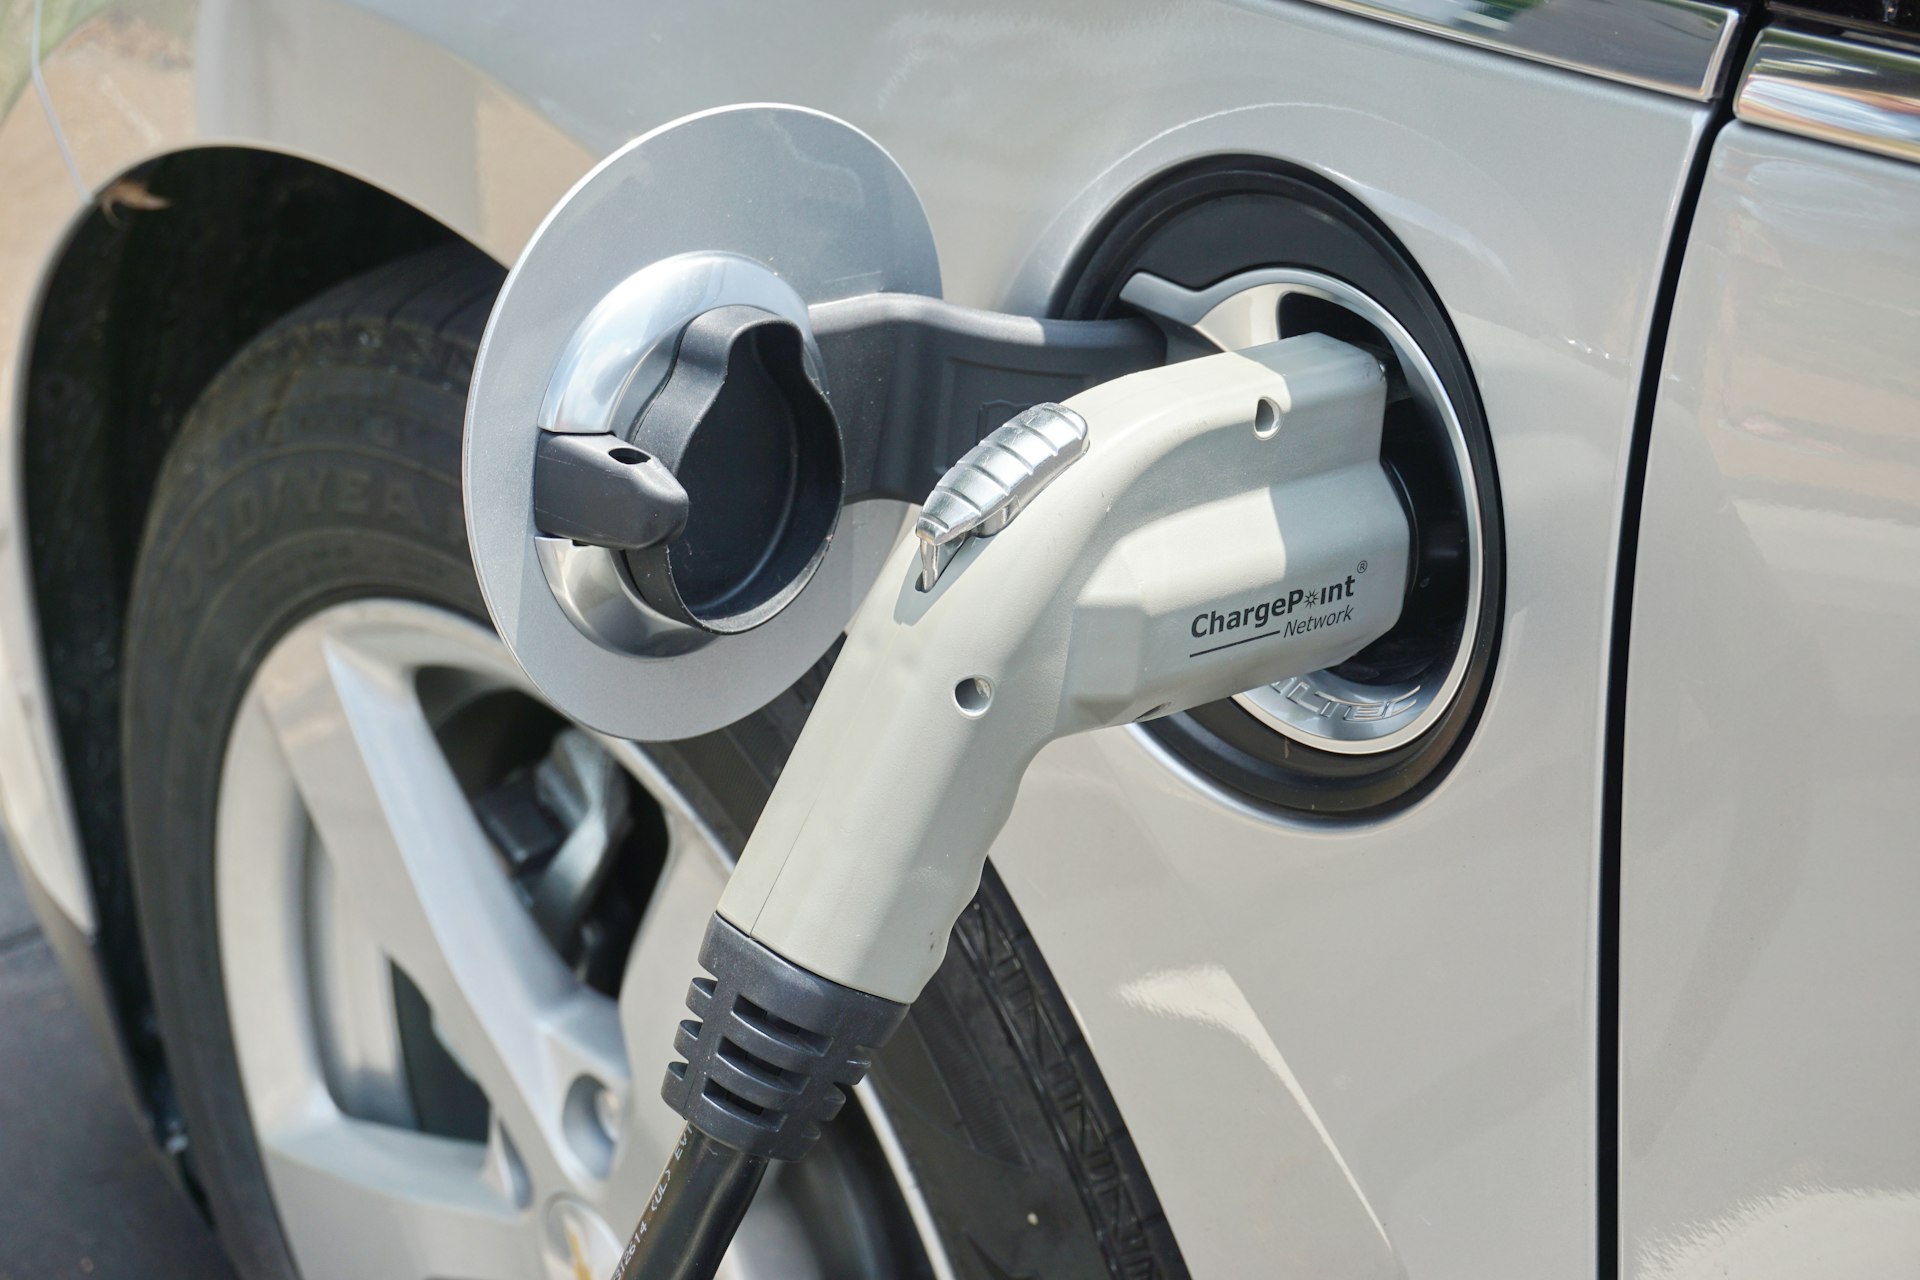 We install all makes and models of electric vehicle chargers